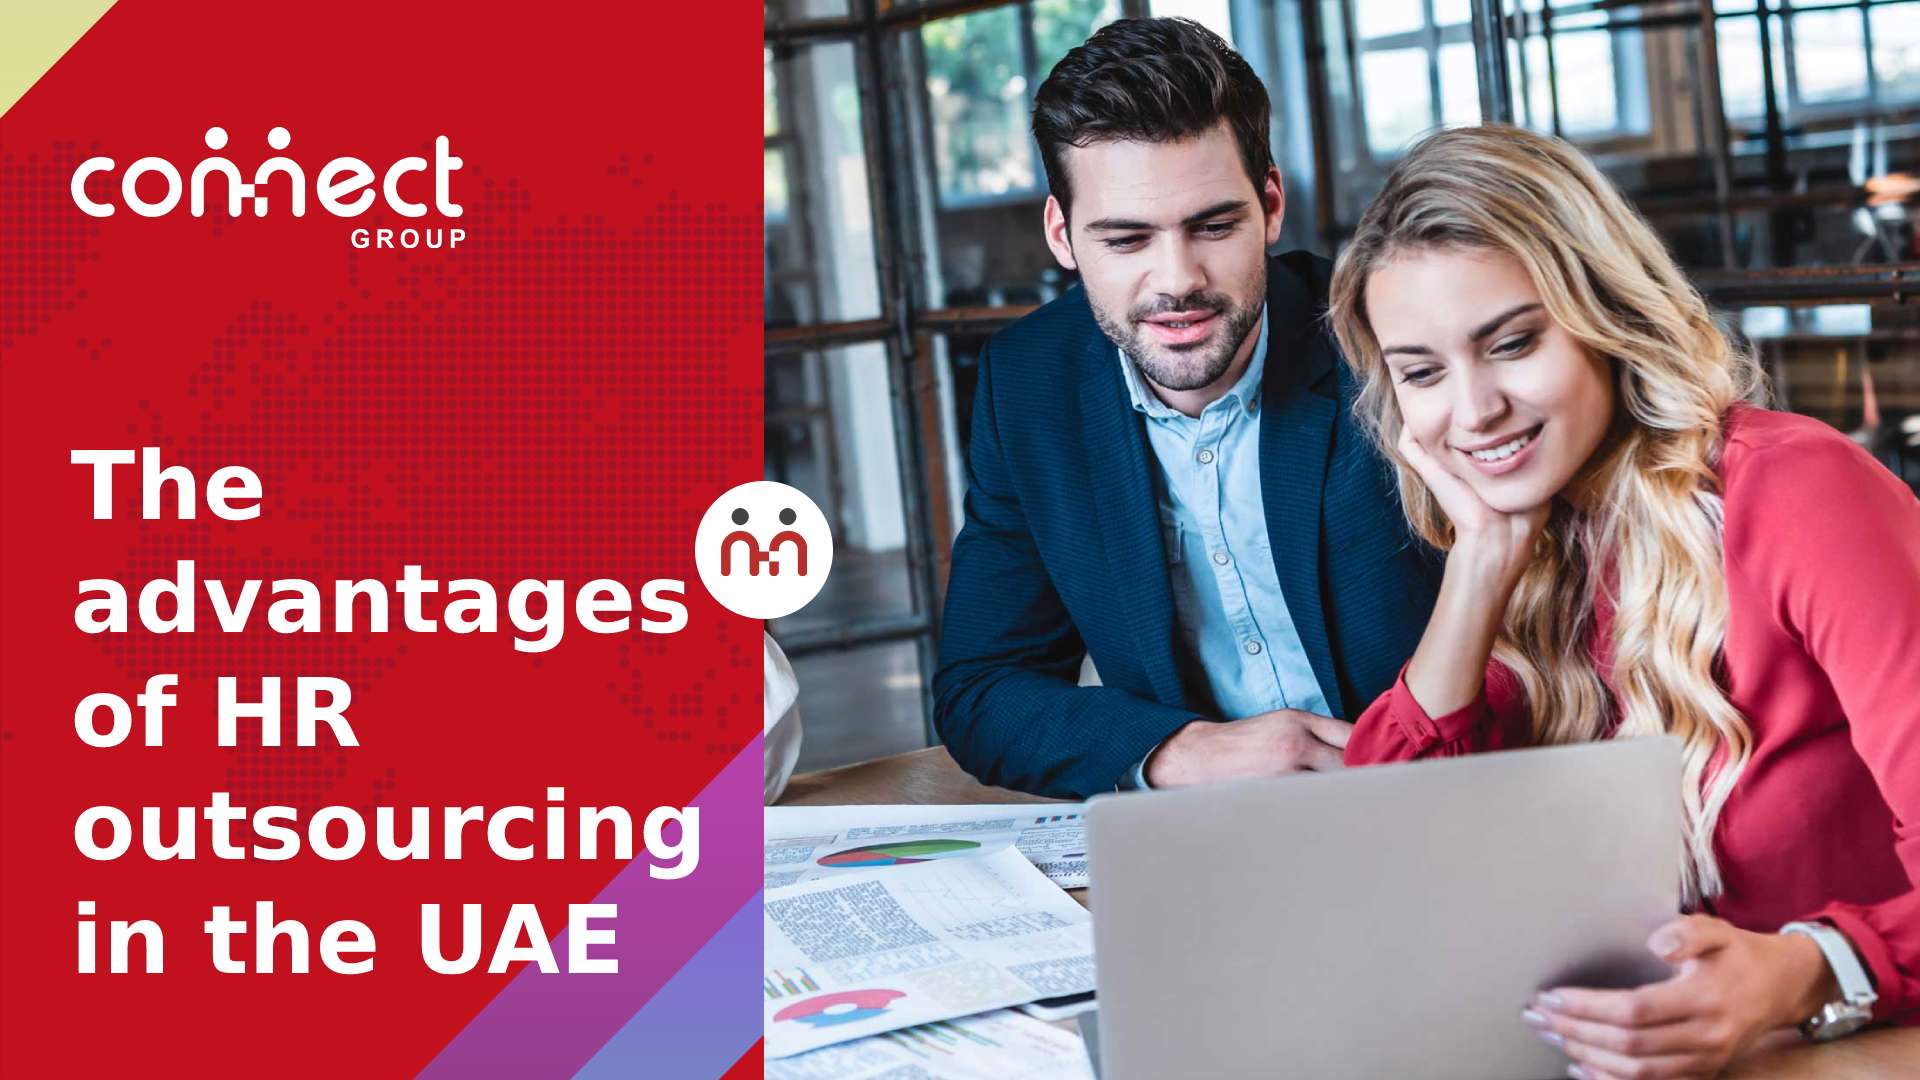 The advantages of HR outsourcing in the UAE